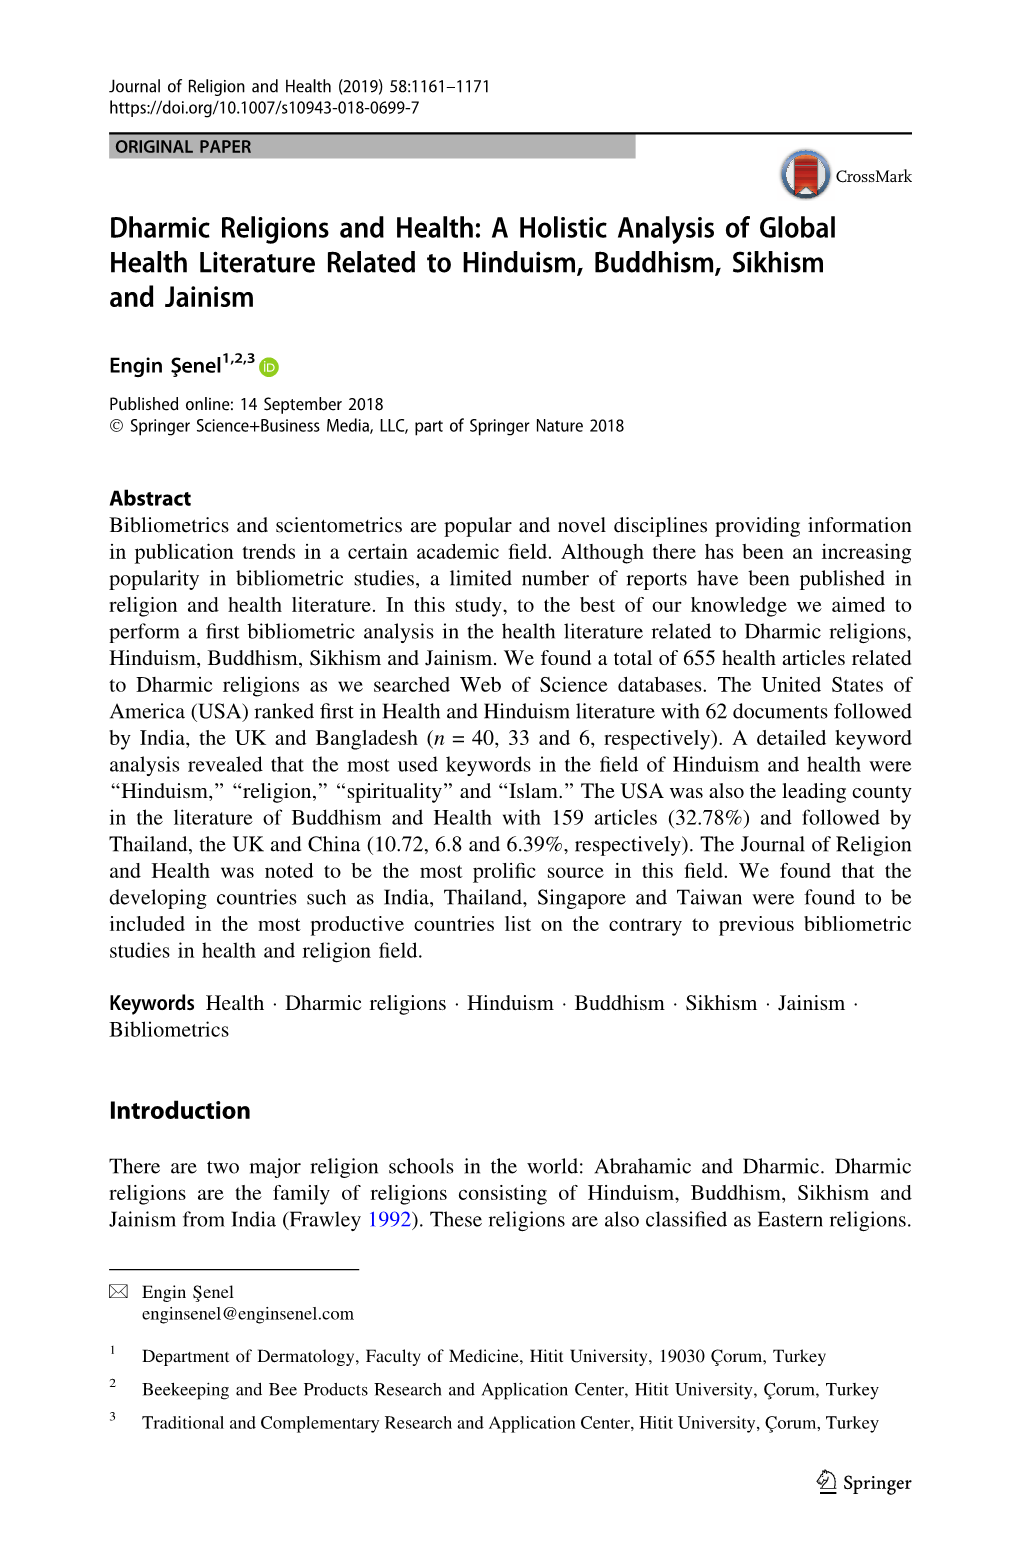 Dharmic Religions and Health: a Holistic Analysis of Global Health Literature Related to Hinduism, Buddhism, Sikhism and Jainism